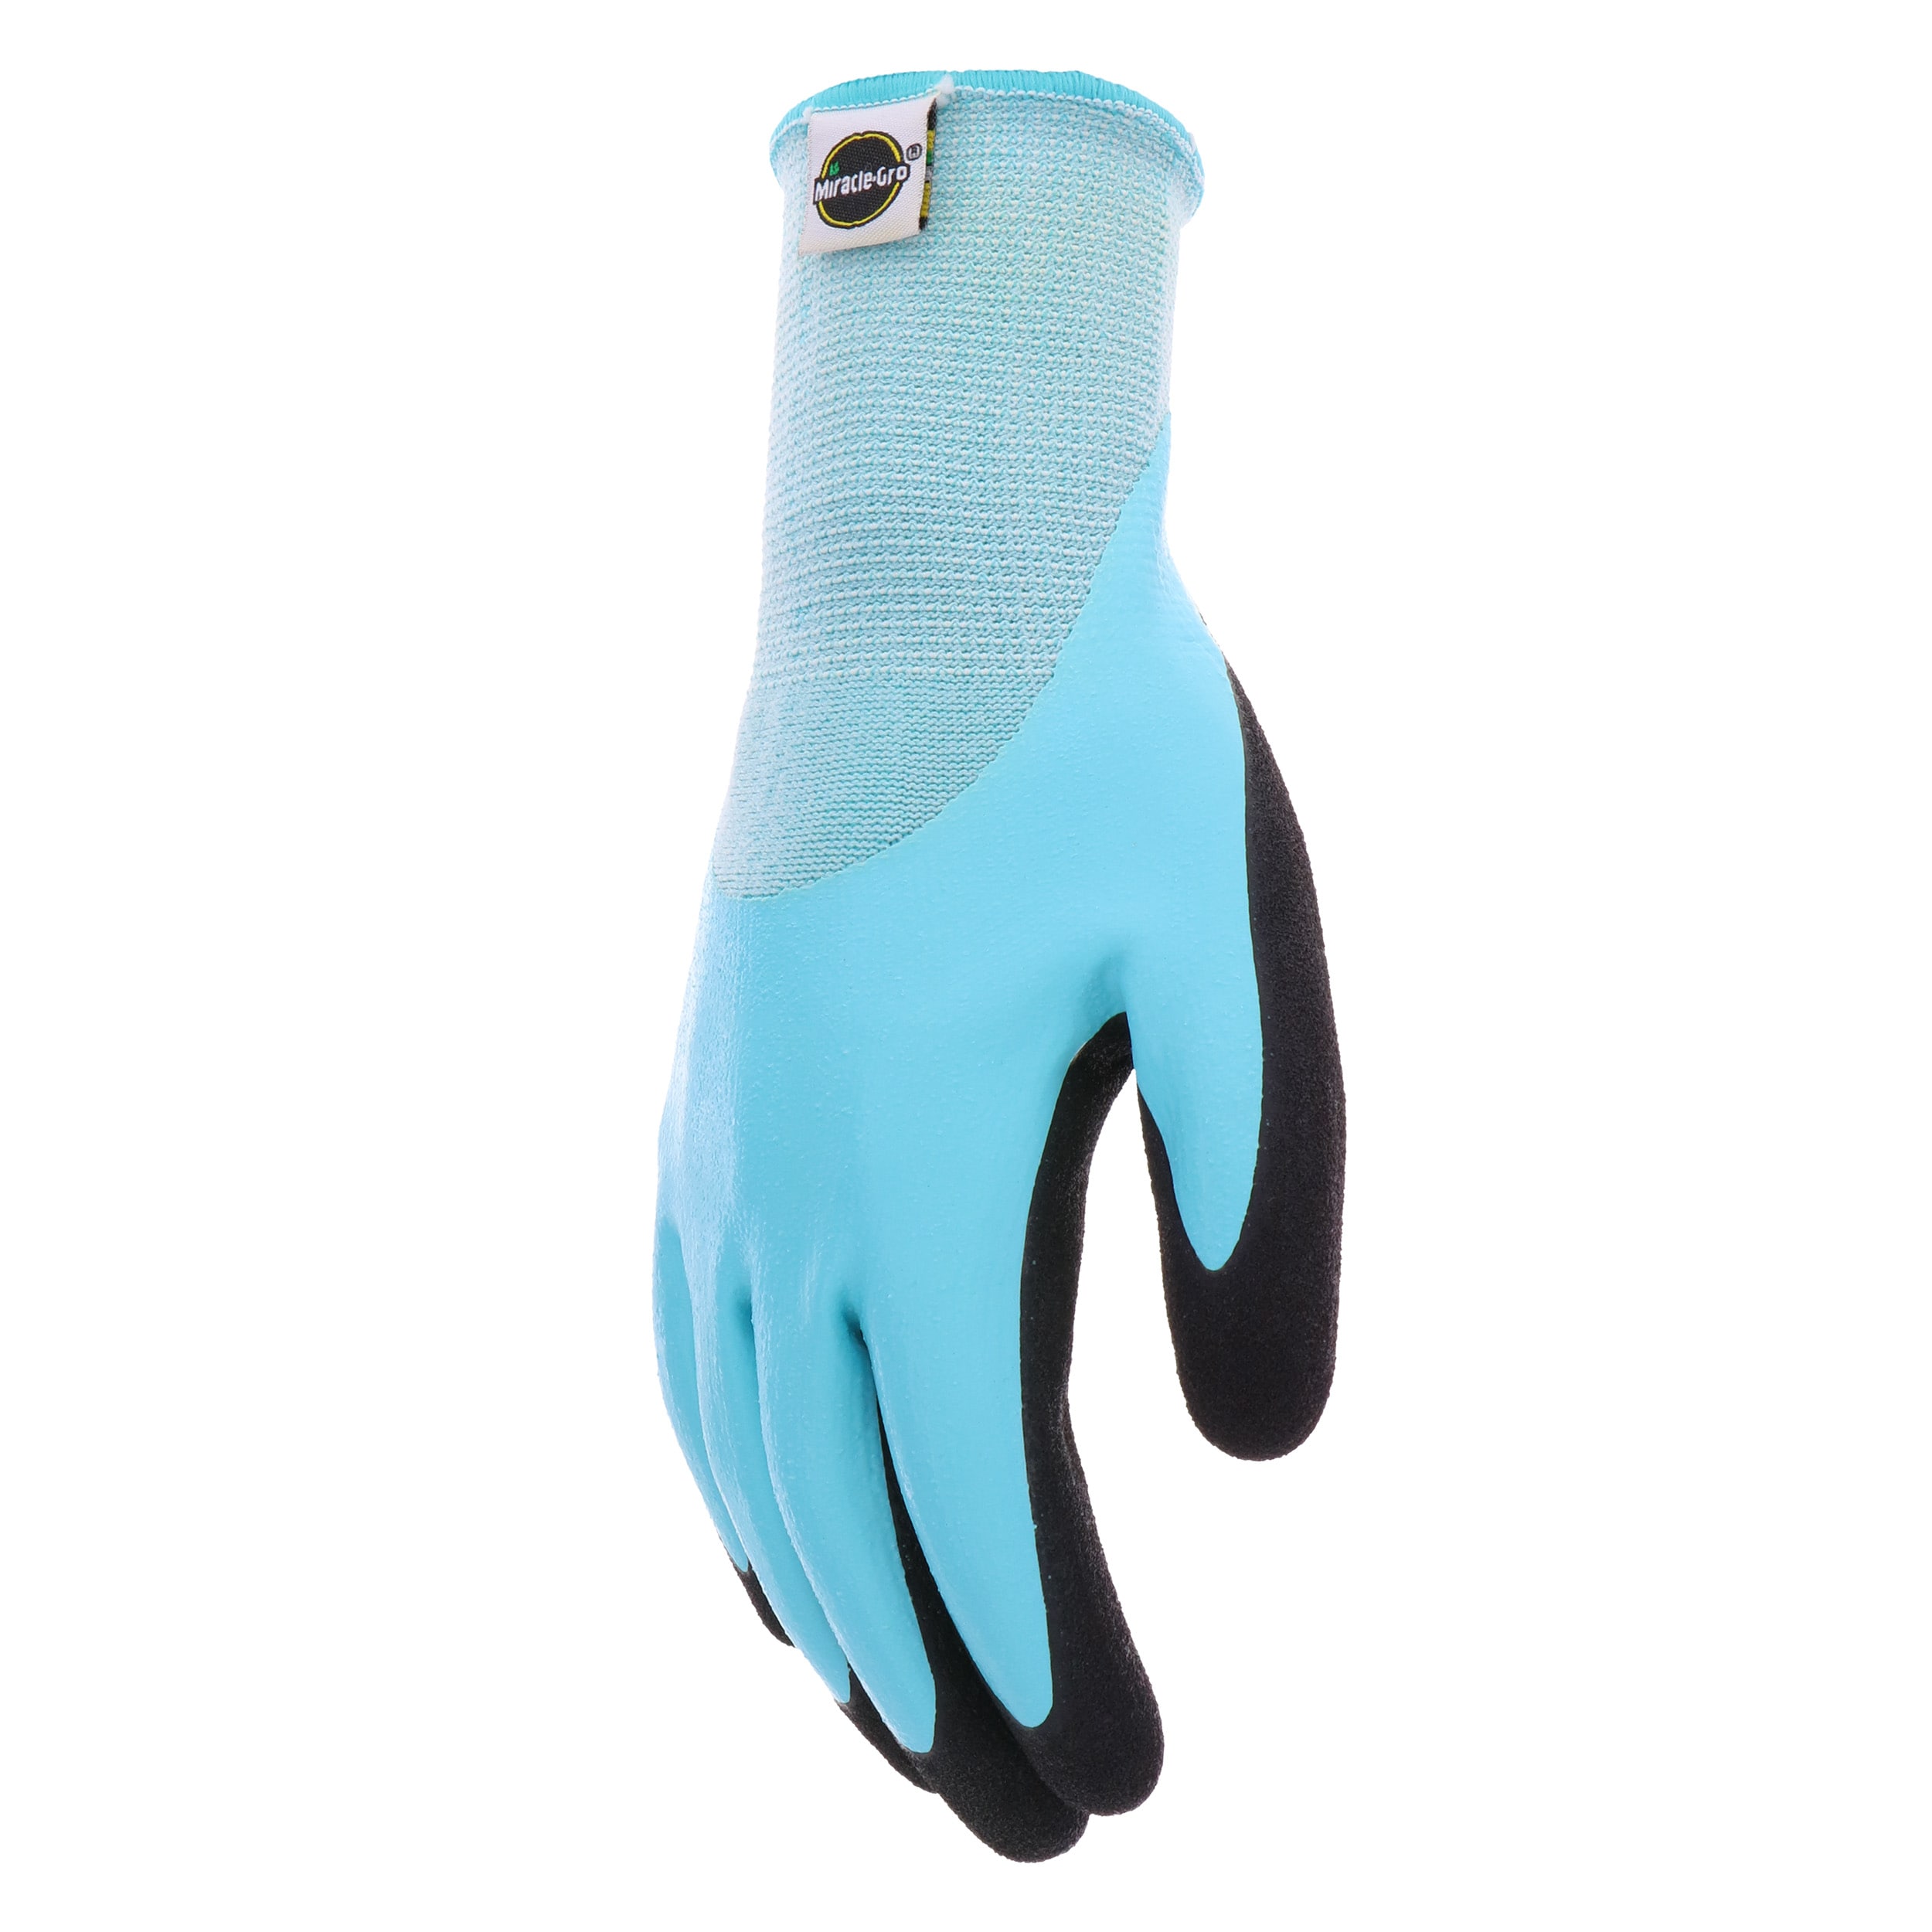 Magnet Fishing Latex Polycotton Protective Gloves